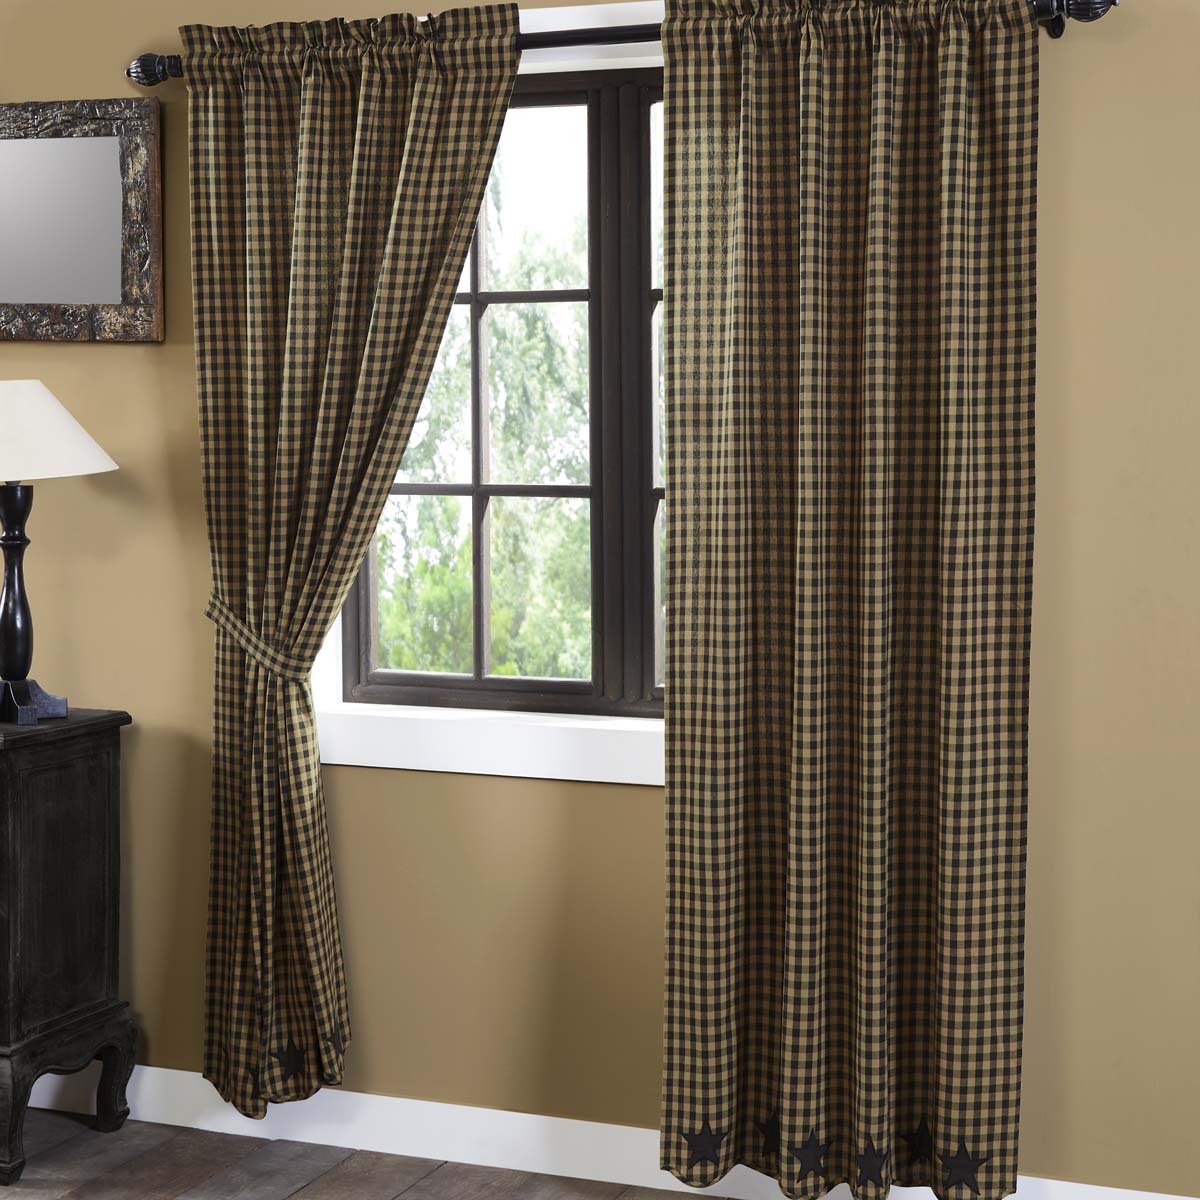 Set of 2 Black Star Scalloped Panel Curtains 84'' x 40''